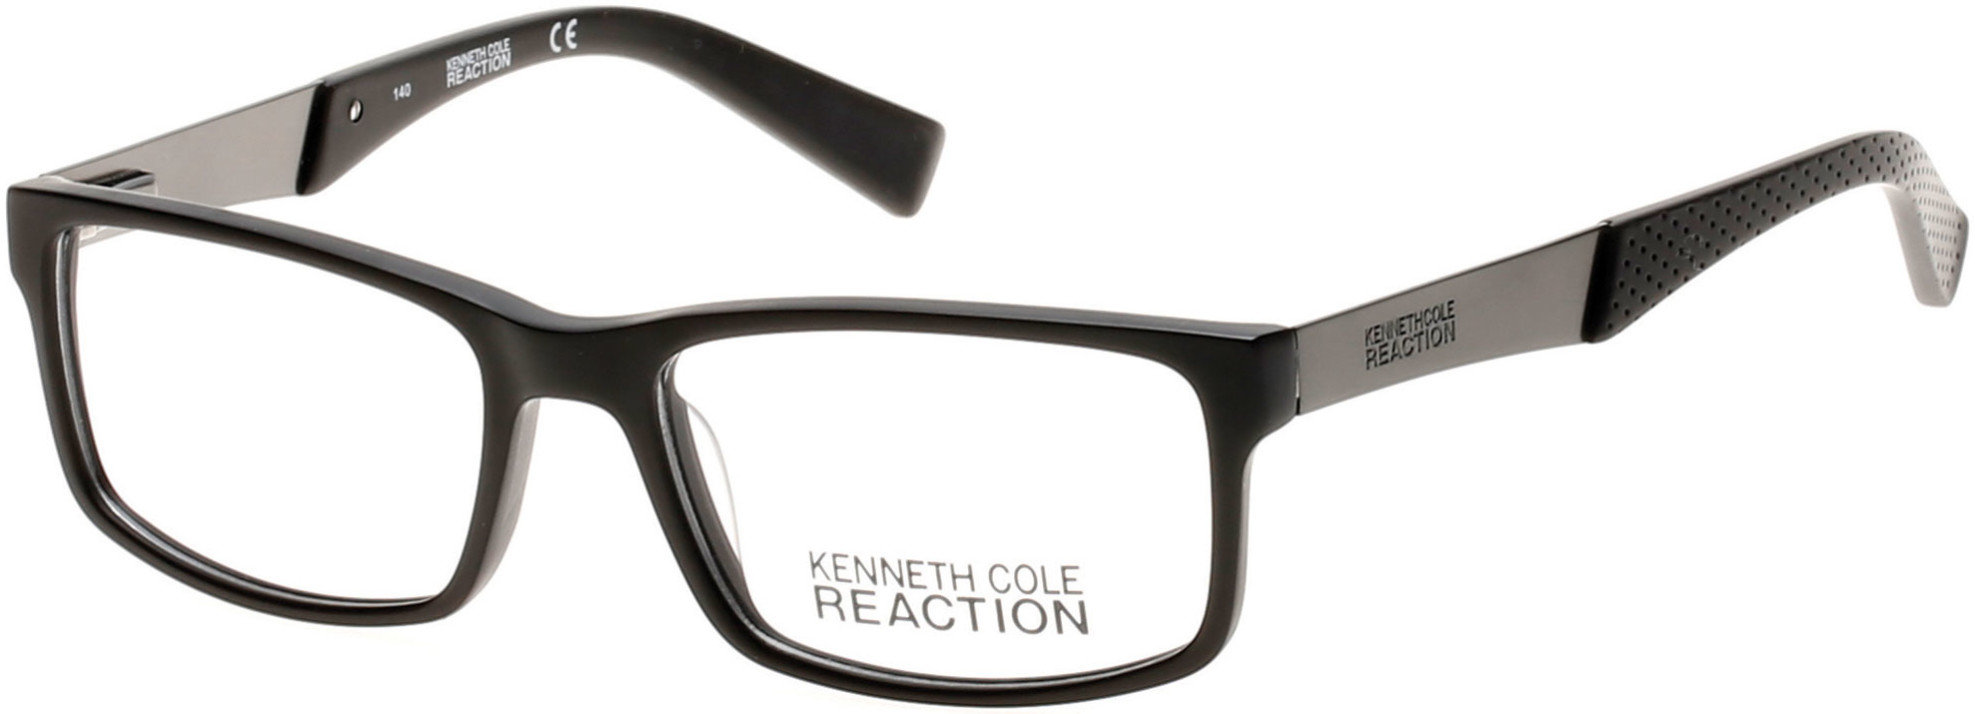 KENNETH COLE NY 0771 002